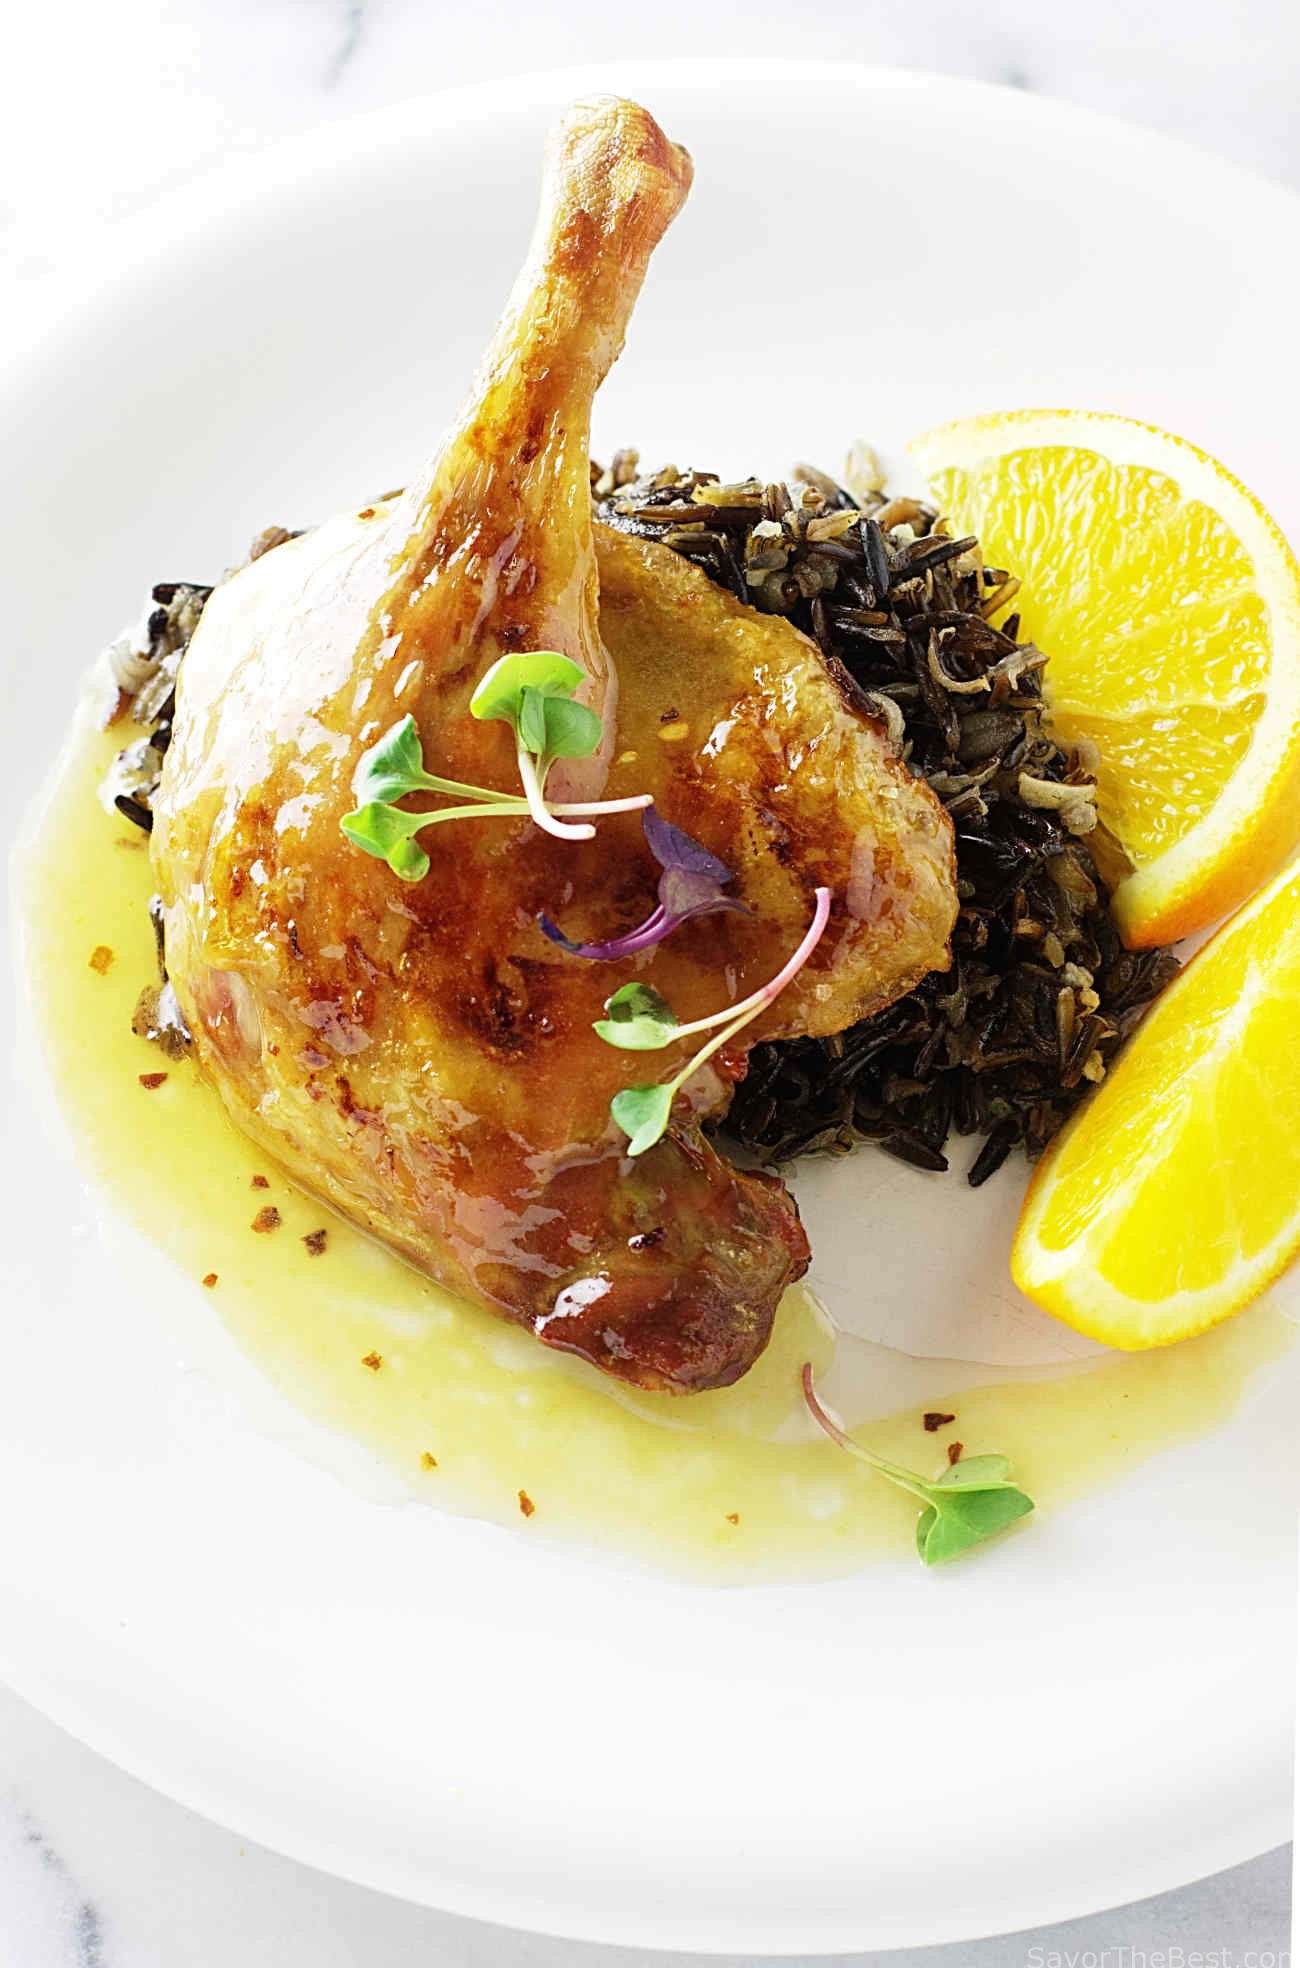 Roasted Duck Legs with Orange Sauce and Wild Rice - Savor the Best